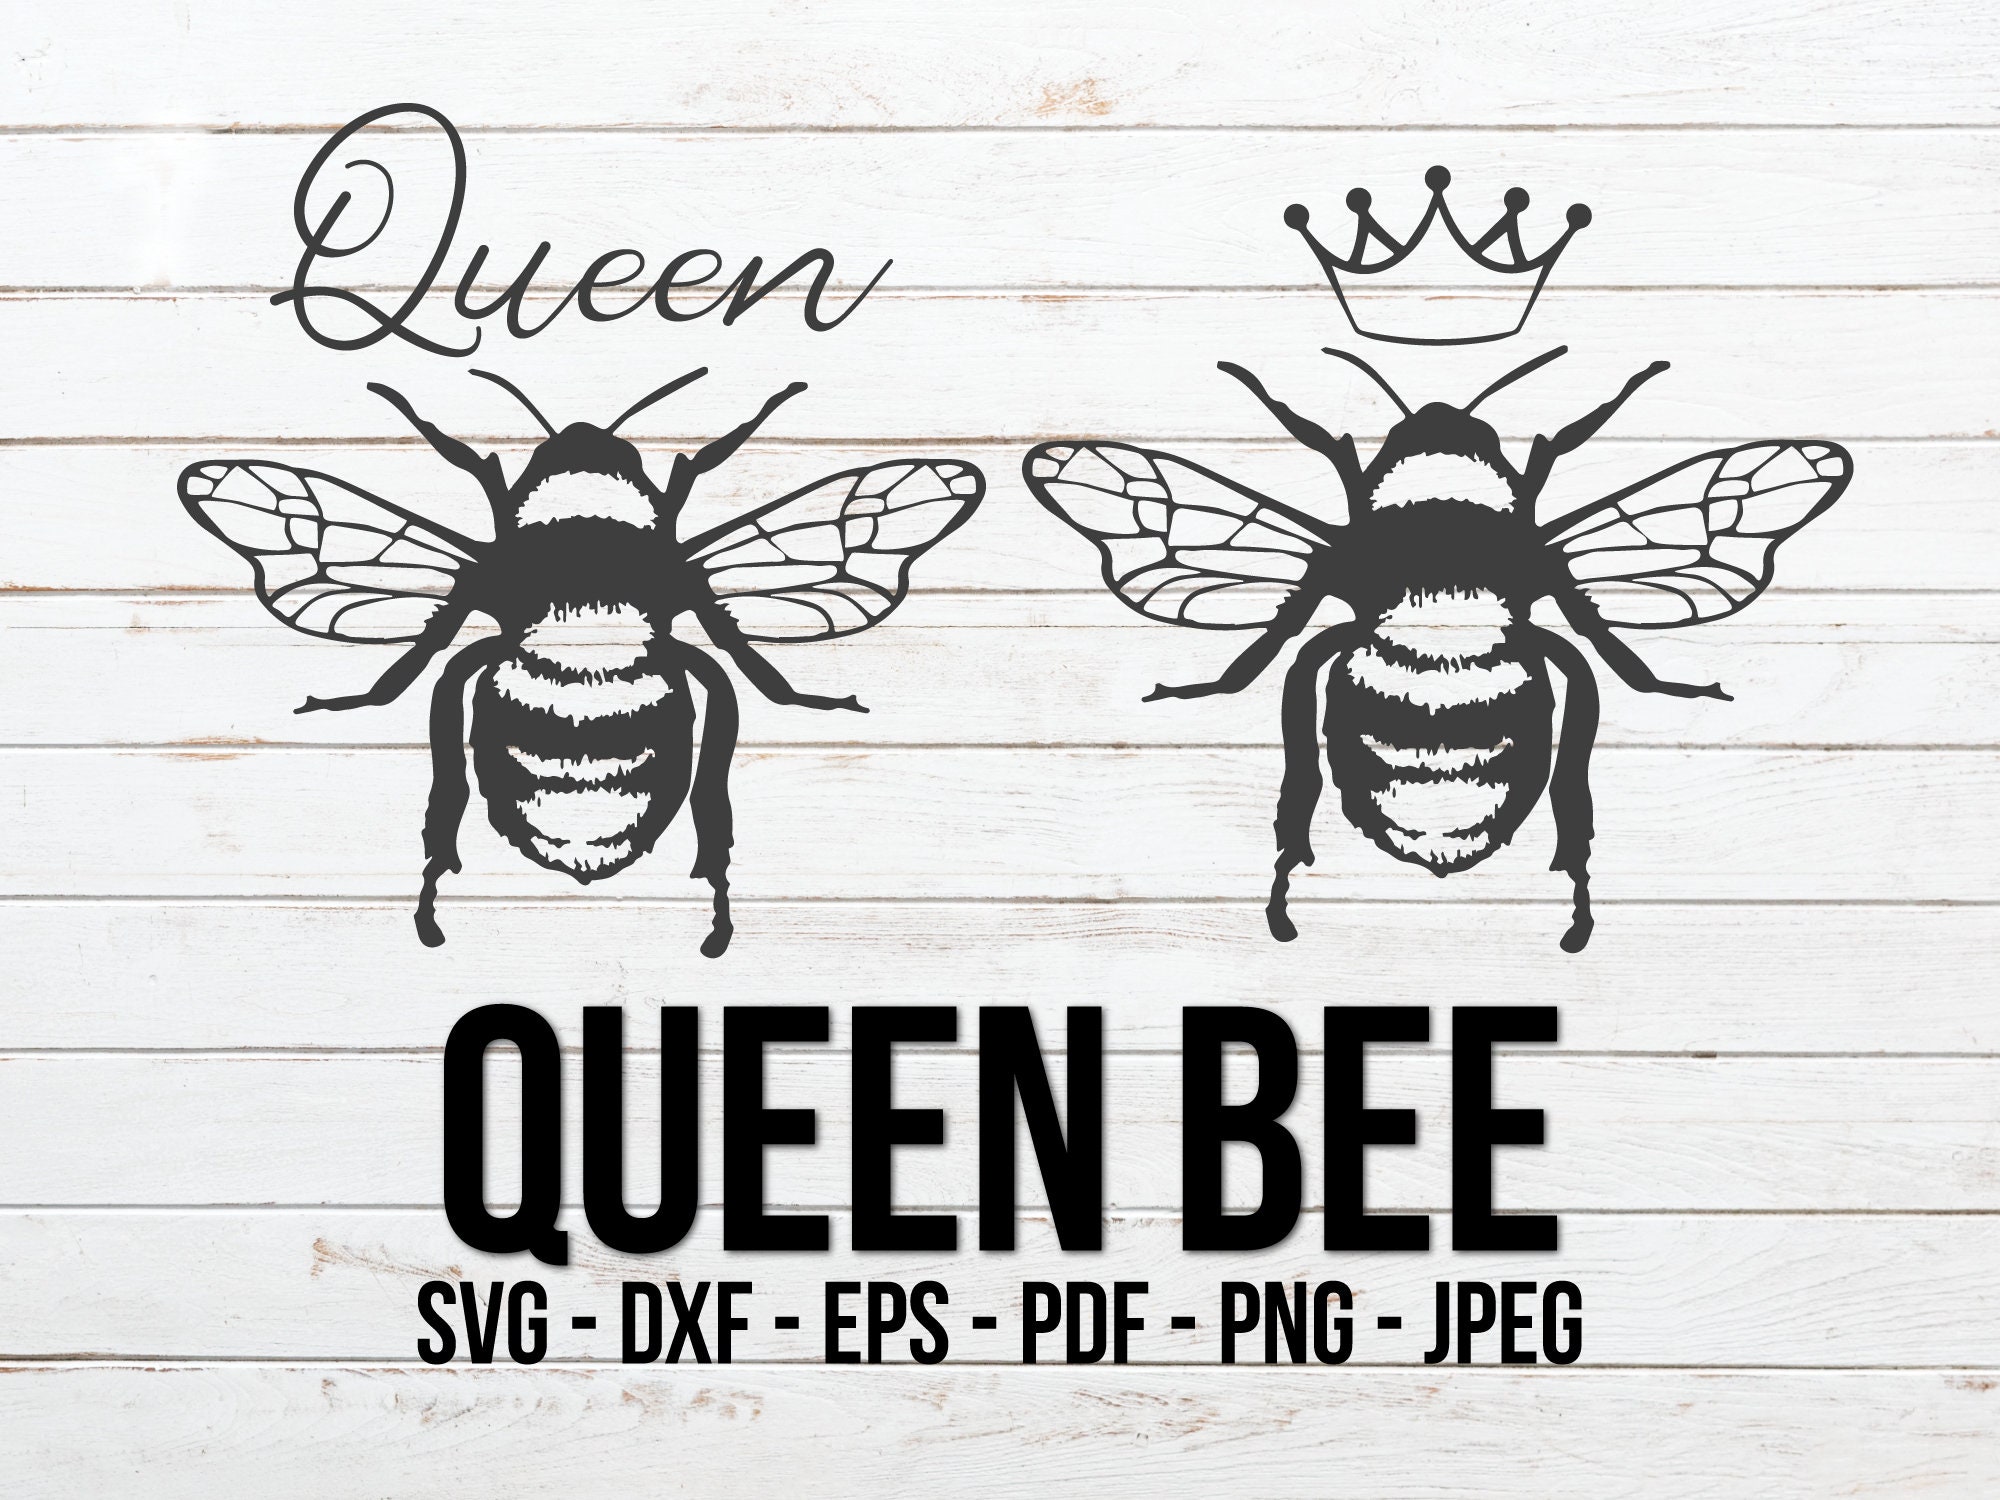 Queen Bee Svg Honey Bee Cut File Dxf Png Jpg Bumble Bee | Etsy